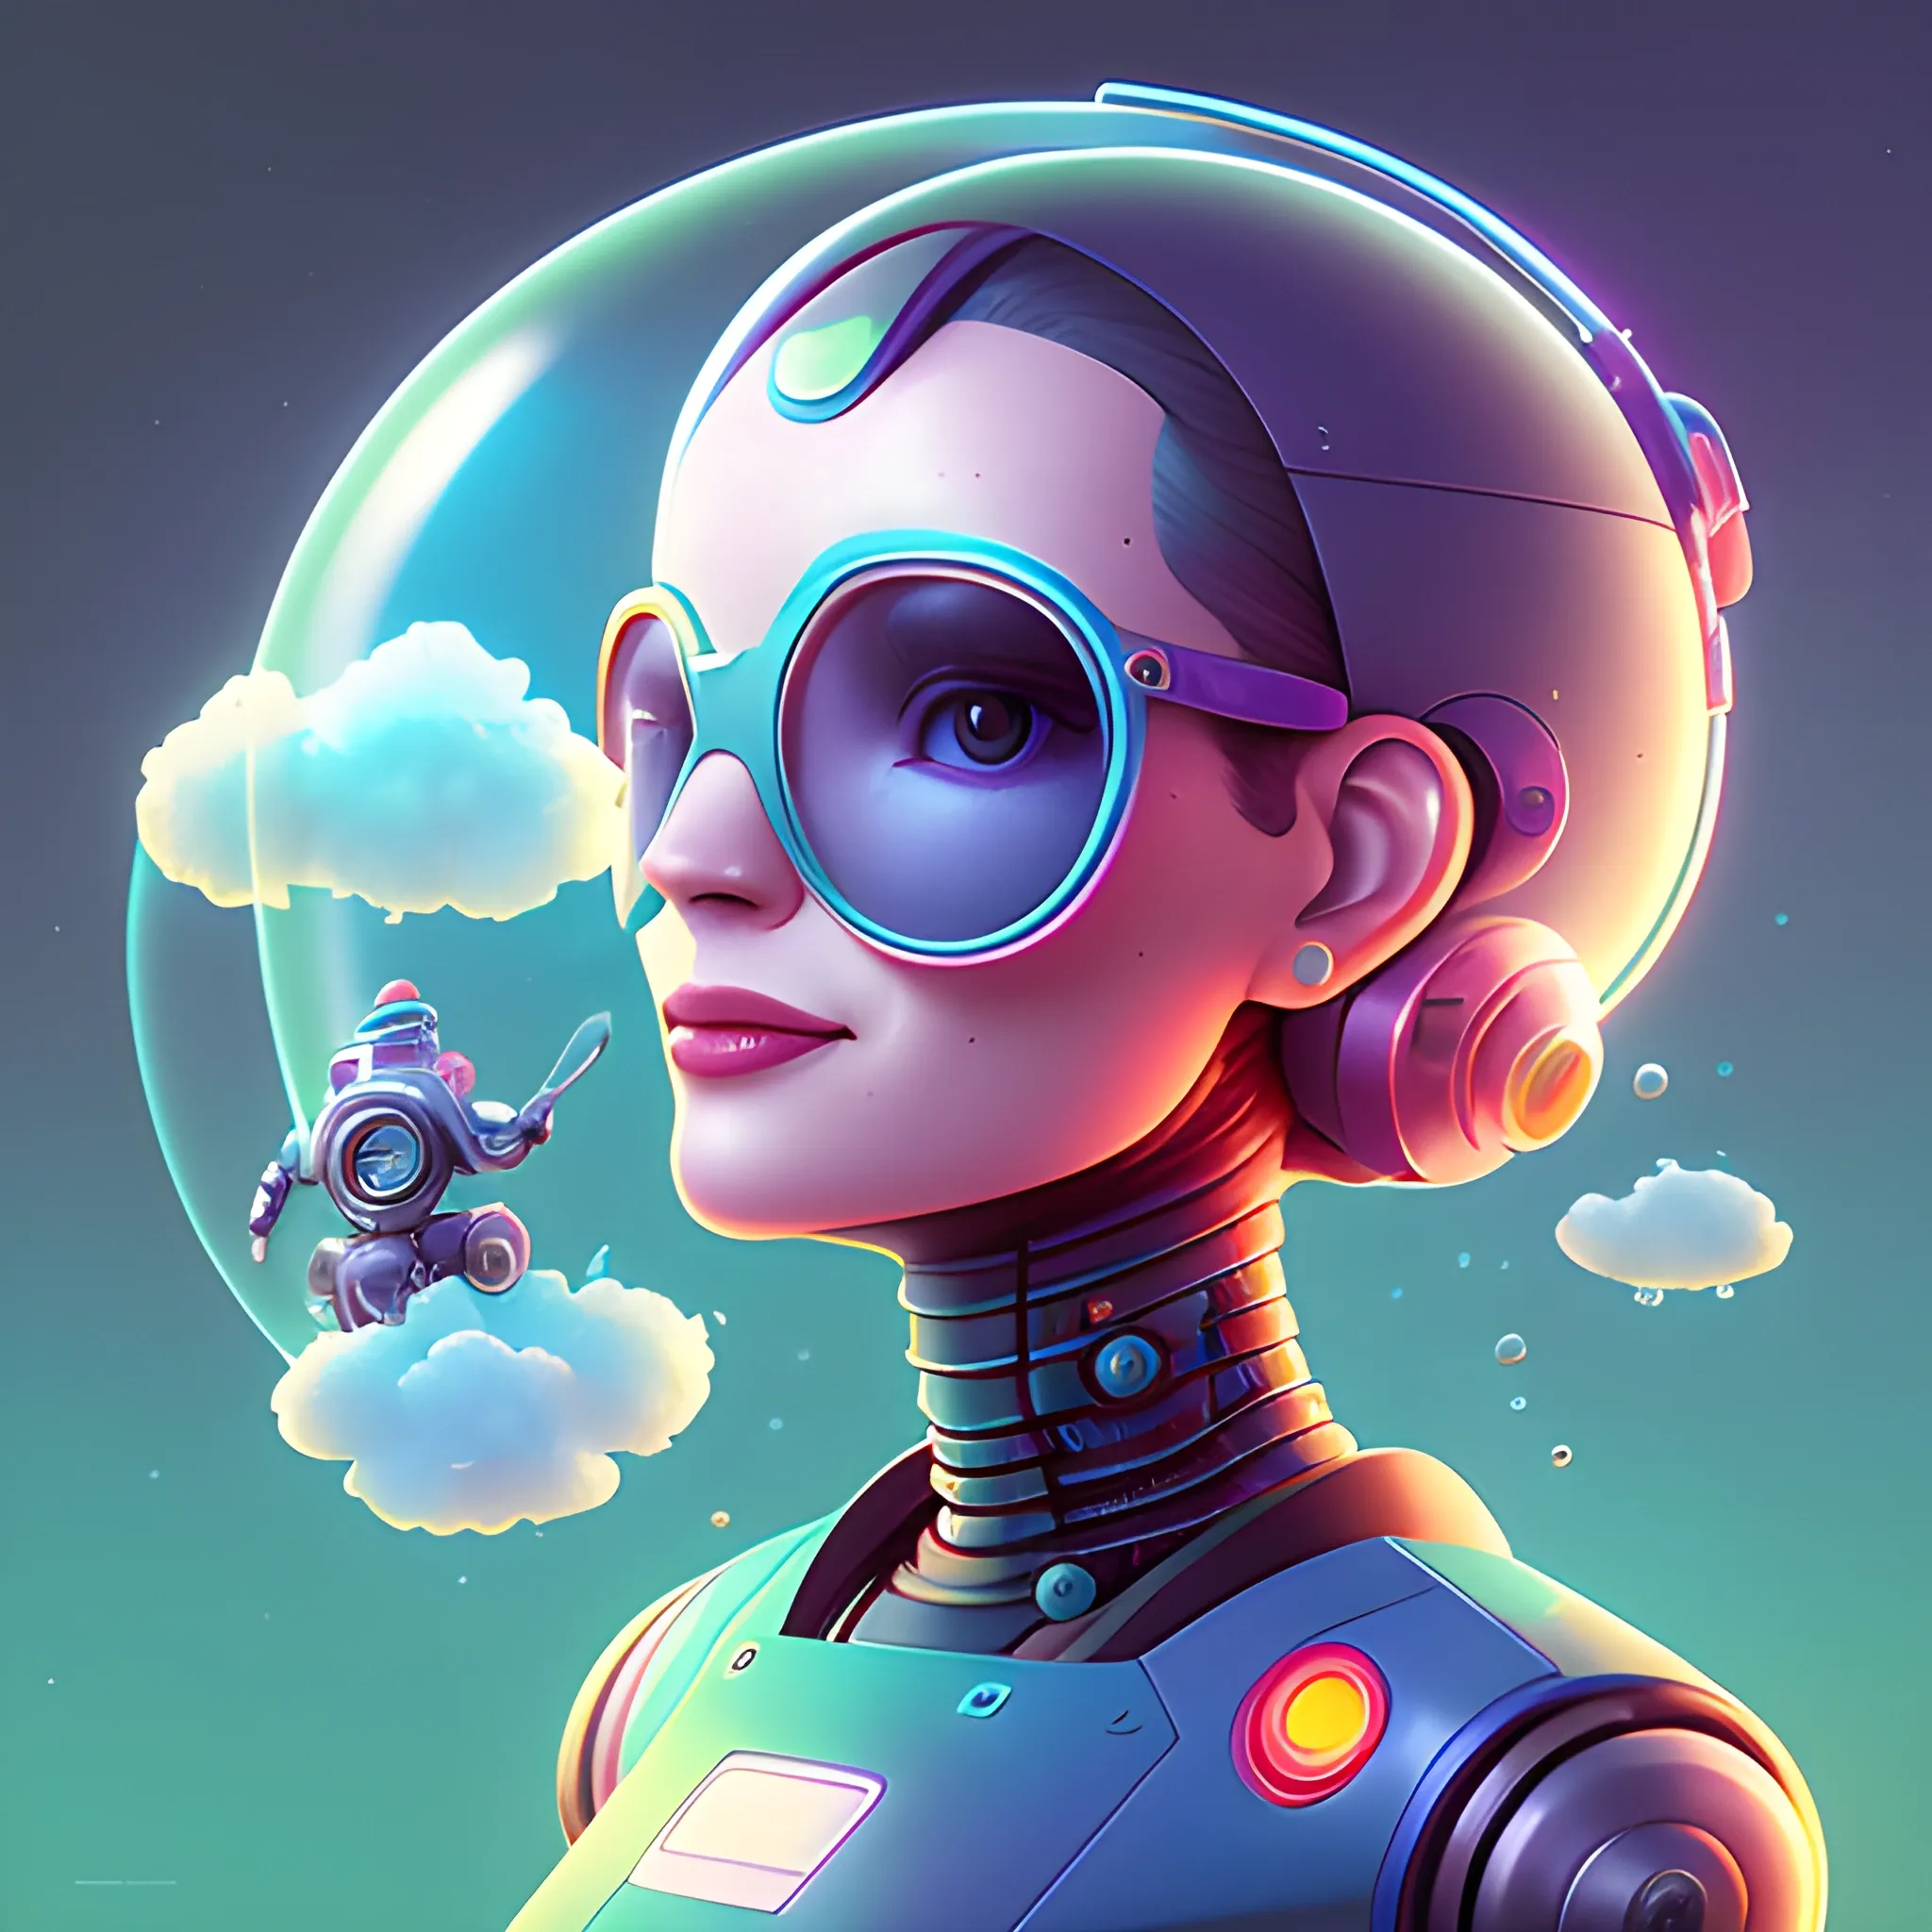 Friendly female robot avatar with government or institutional vi ...